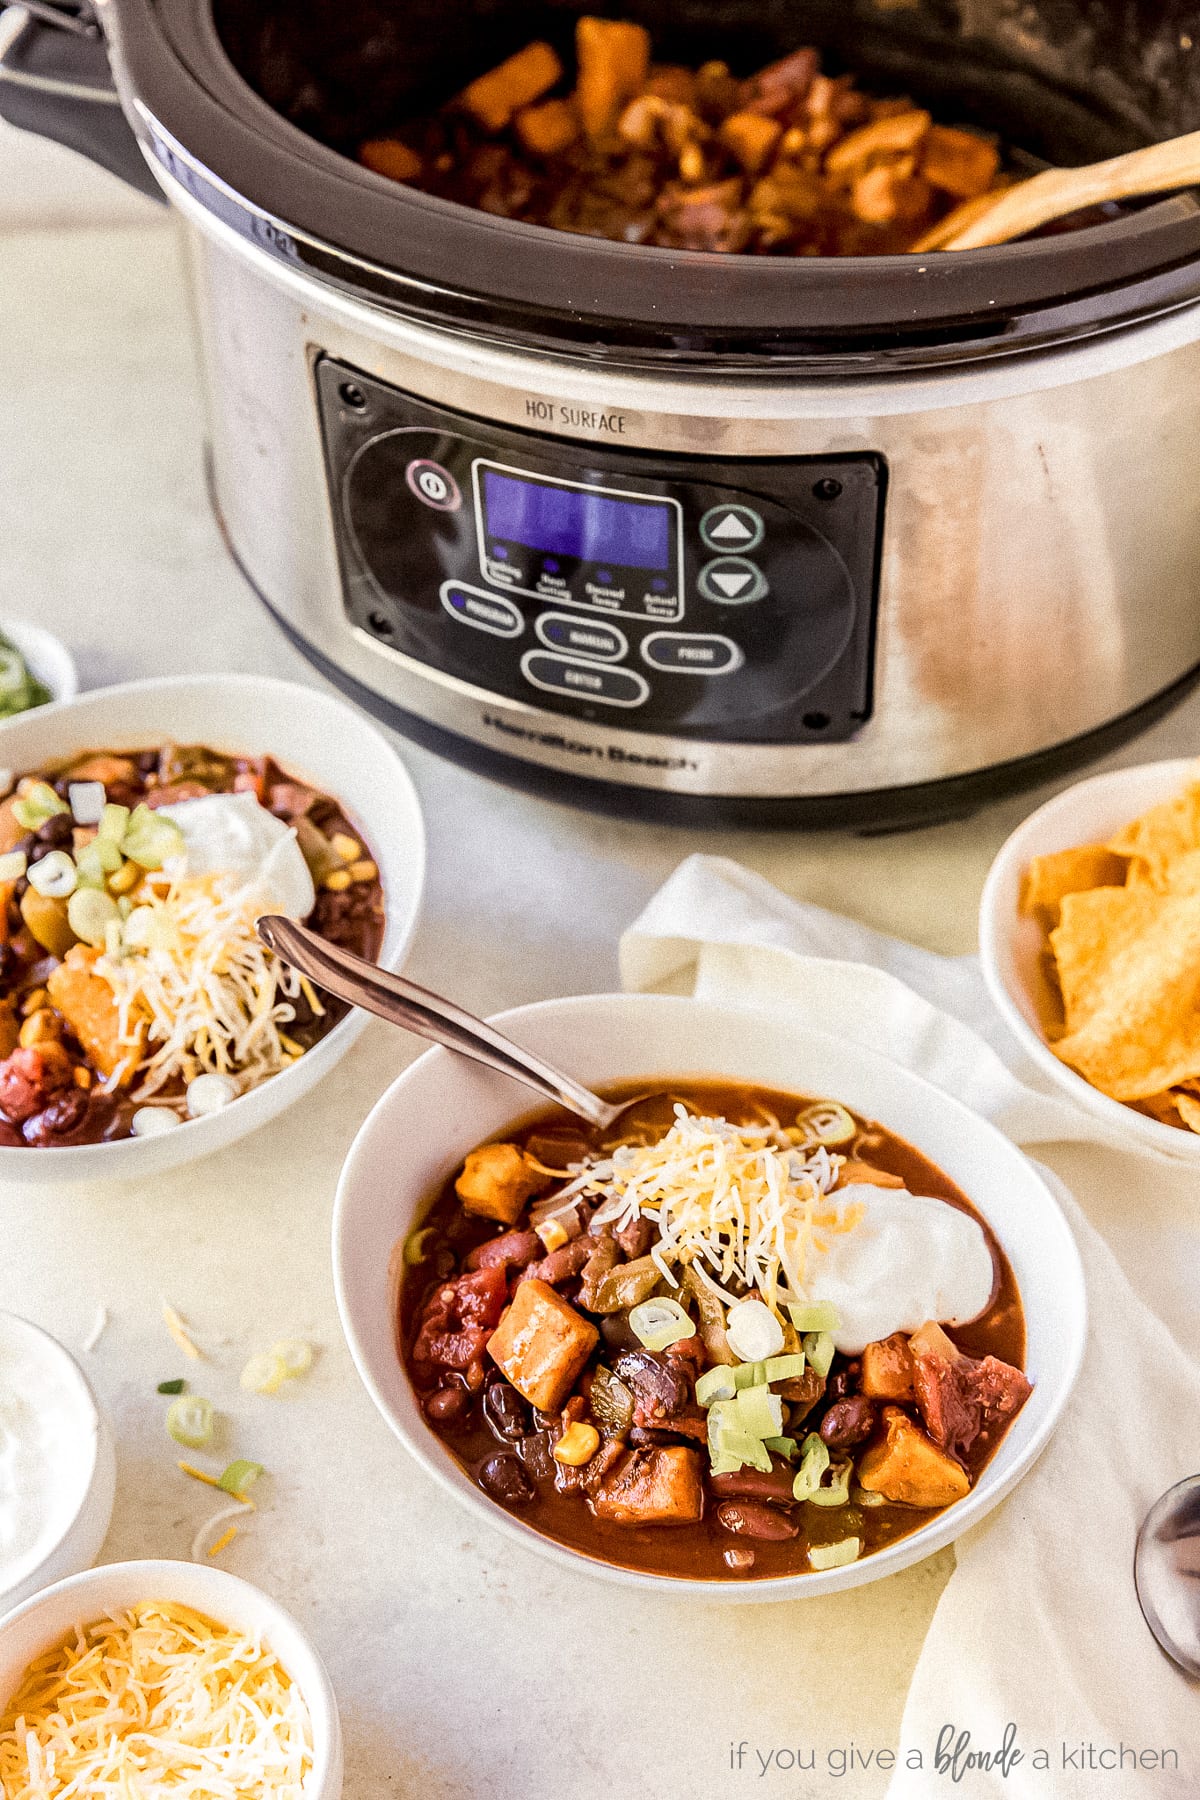 two bowls of sweet potato chili in front of stainless steel slow cooker full of chili